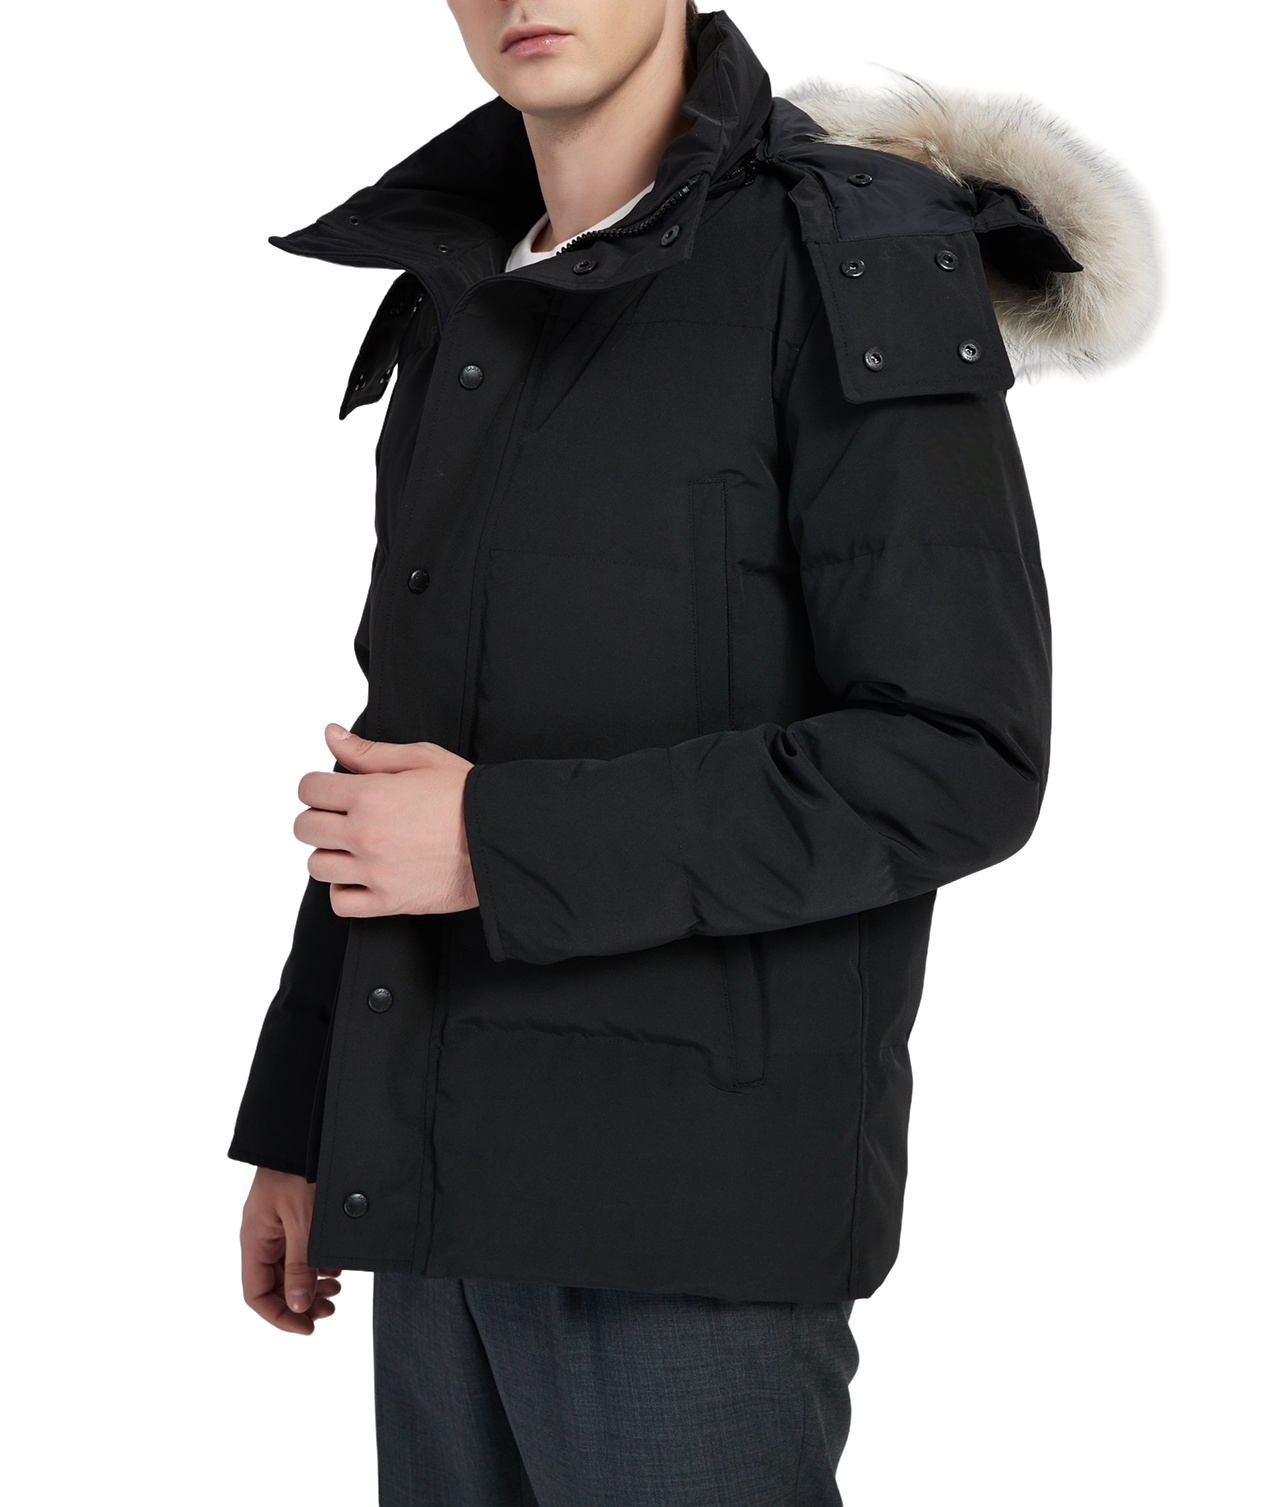 Vintermen Coat Outdoor Leisure Sports Down Jacket Goose White Duck Windproof Parker Long Leather Collar Cap Warm Real Wolf Fur Stylish Classic Coats